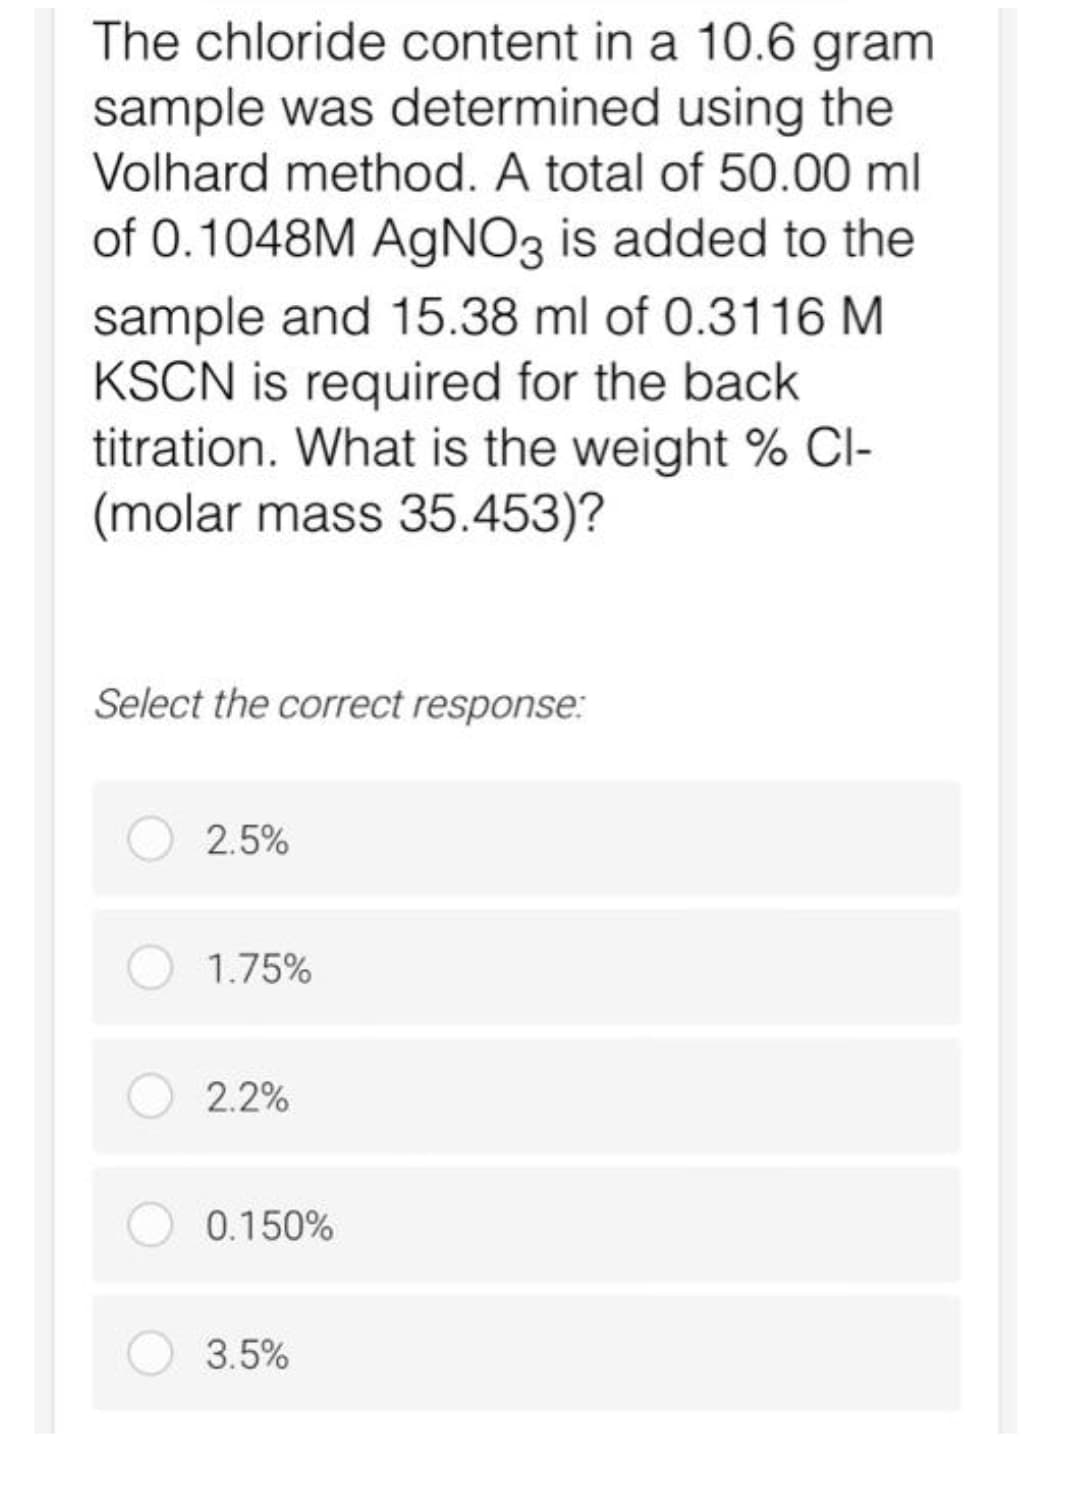 The chloride content in a 10.6 gram
sample was determined using the
Volhard method. A total of 50.00 ml
of 0.1048M AgNO3 is added to the
sample and 15.38 ml of 0.3116 M
KSCN is required for the back
titration. What is the weight % CI-
(molar mass 35.453)?
Select the correct response:
2.5%
1.75%
2.2%
0.150%
3.5%
